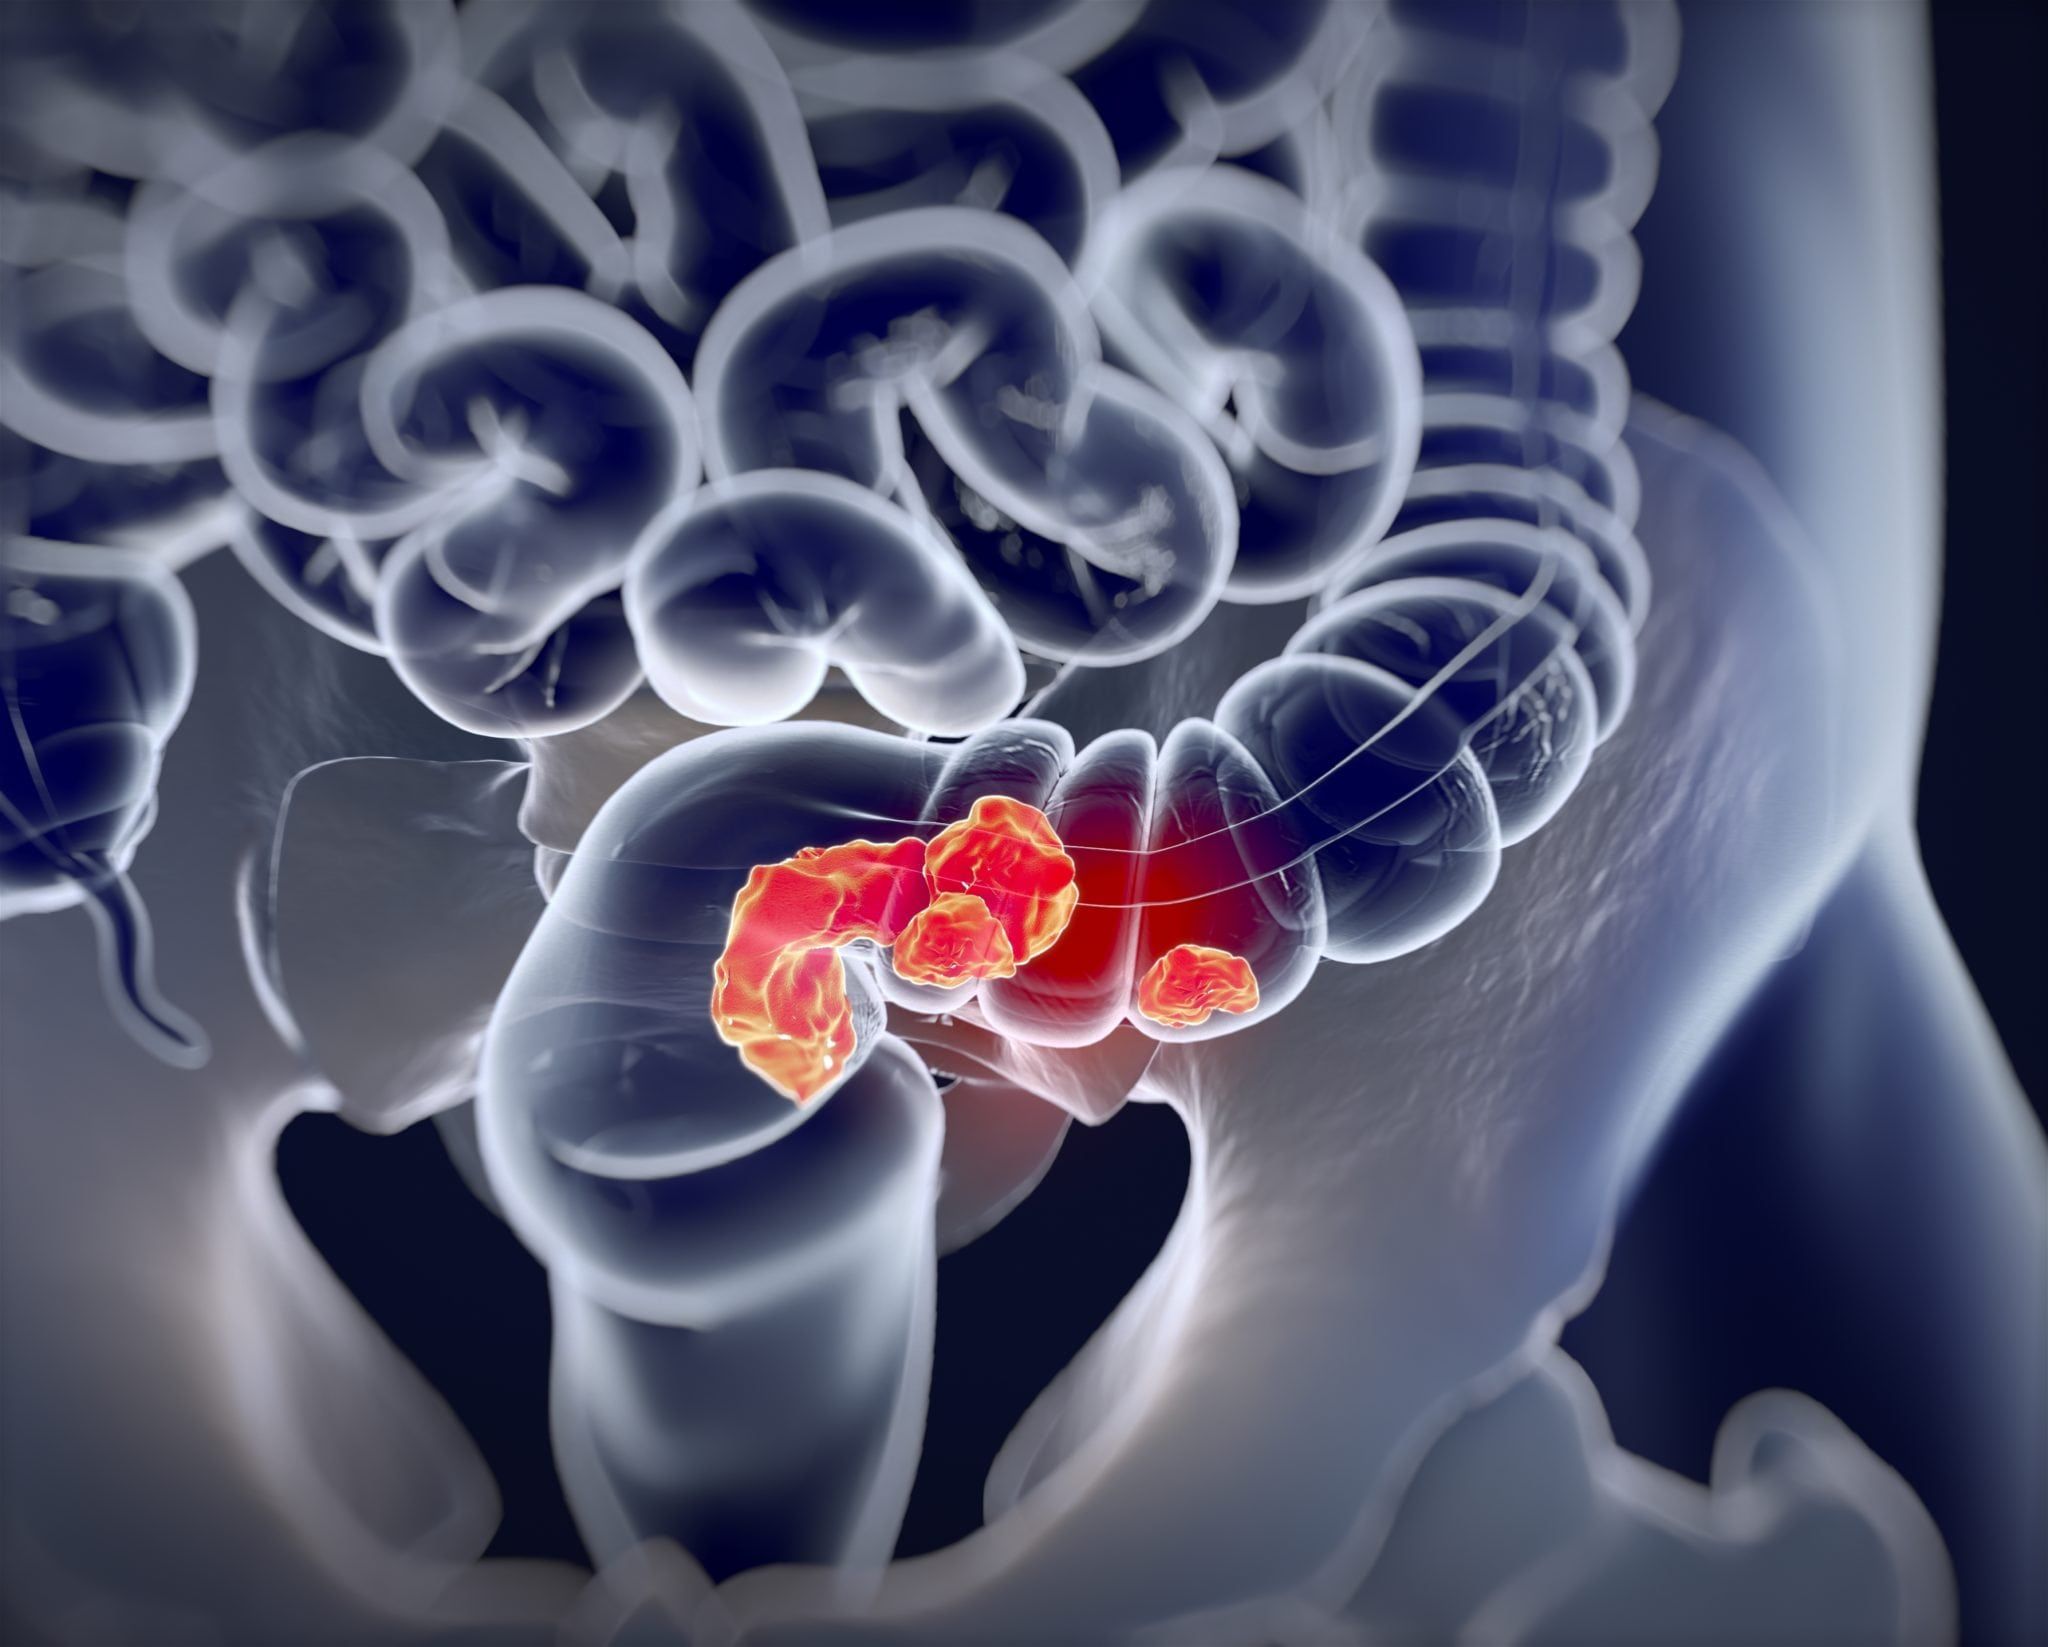 Colorectal cancer, medical anatomical illustration showing early stages of colorectal cancer